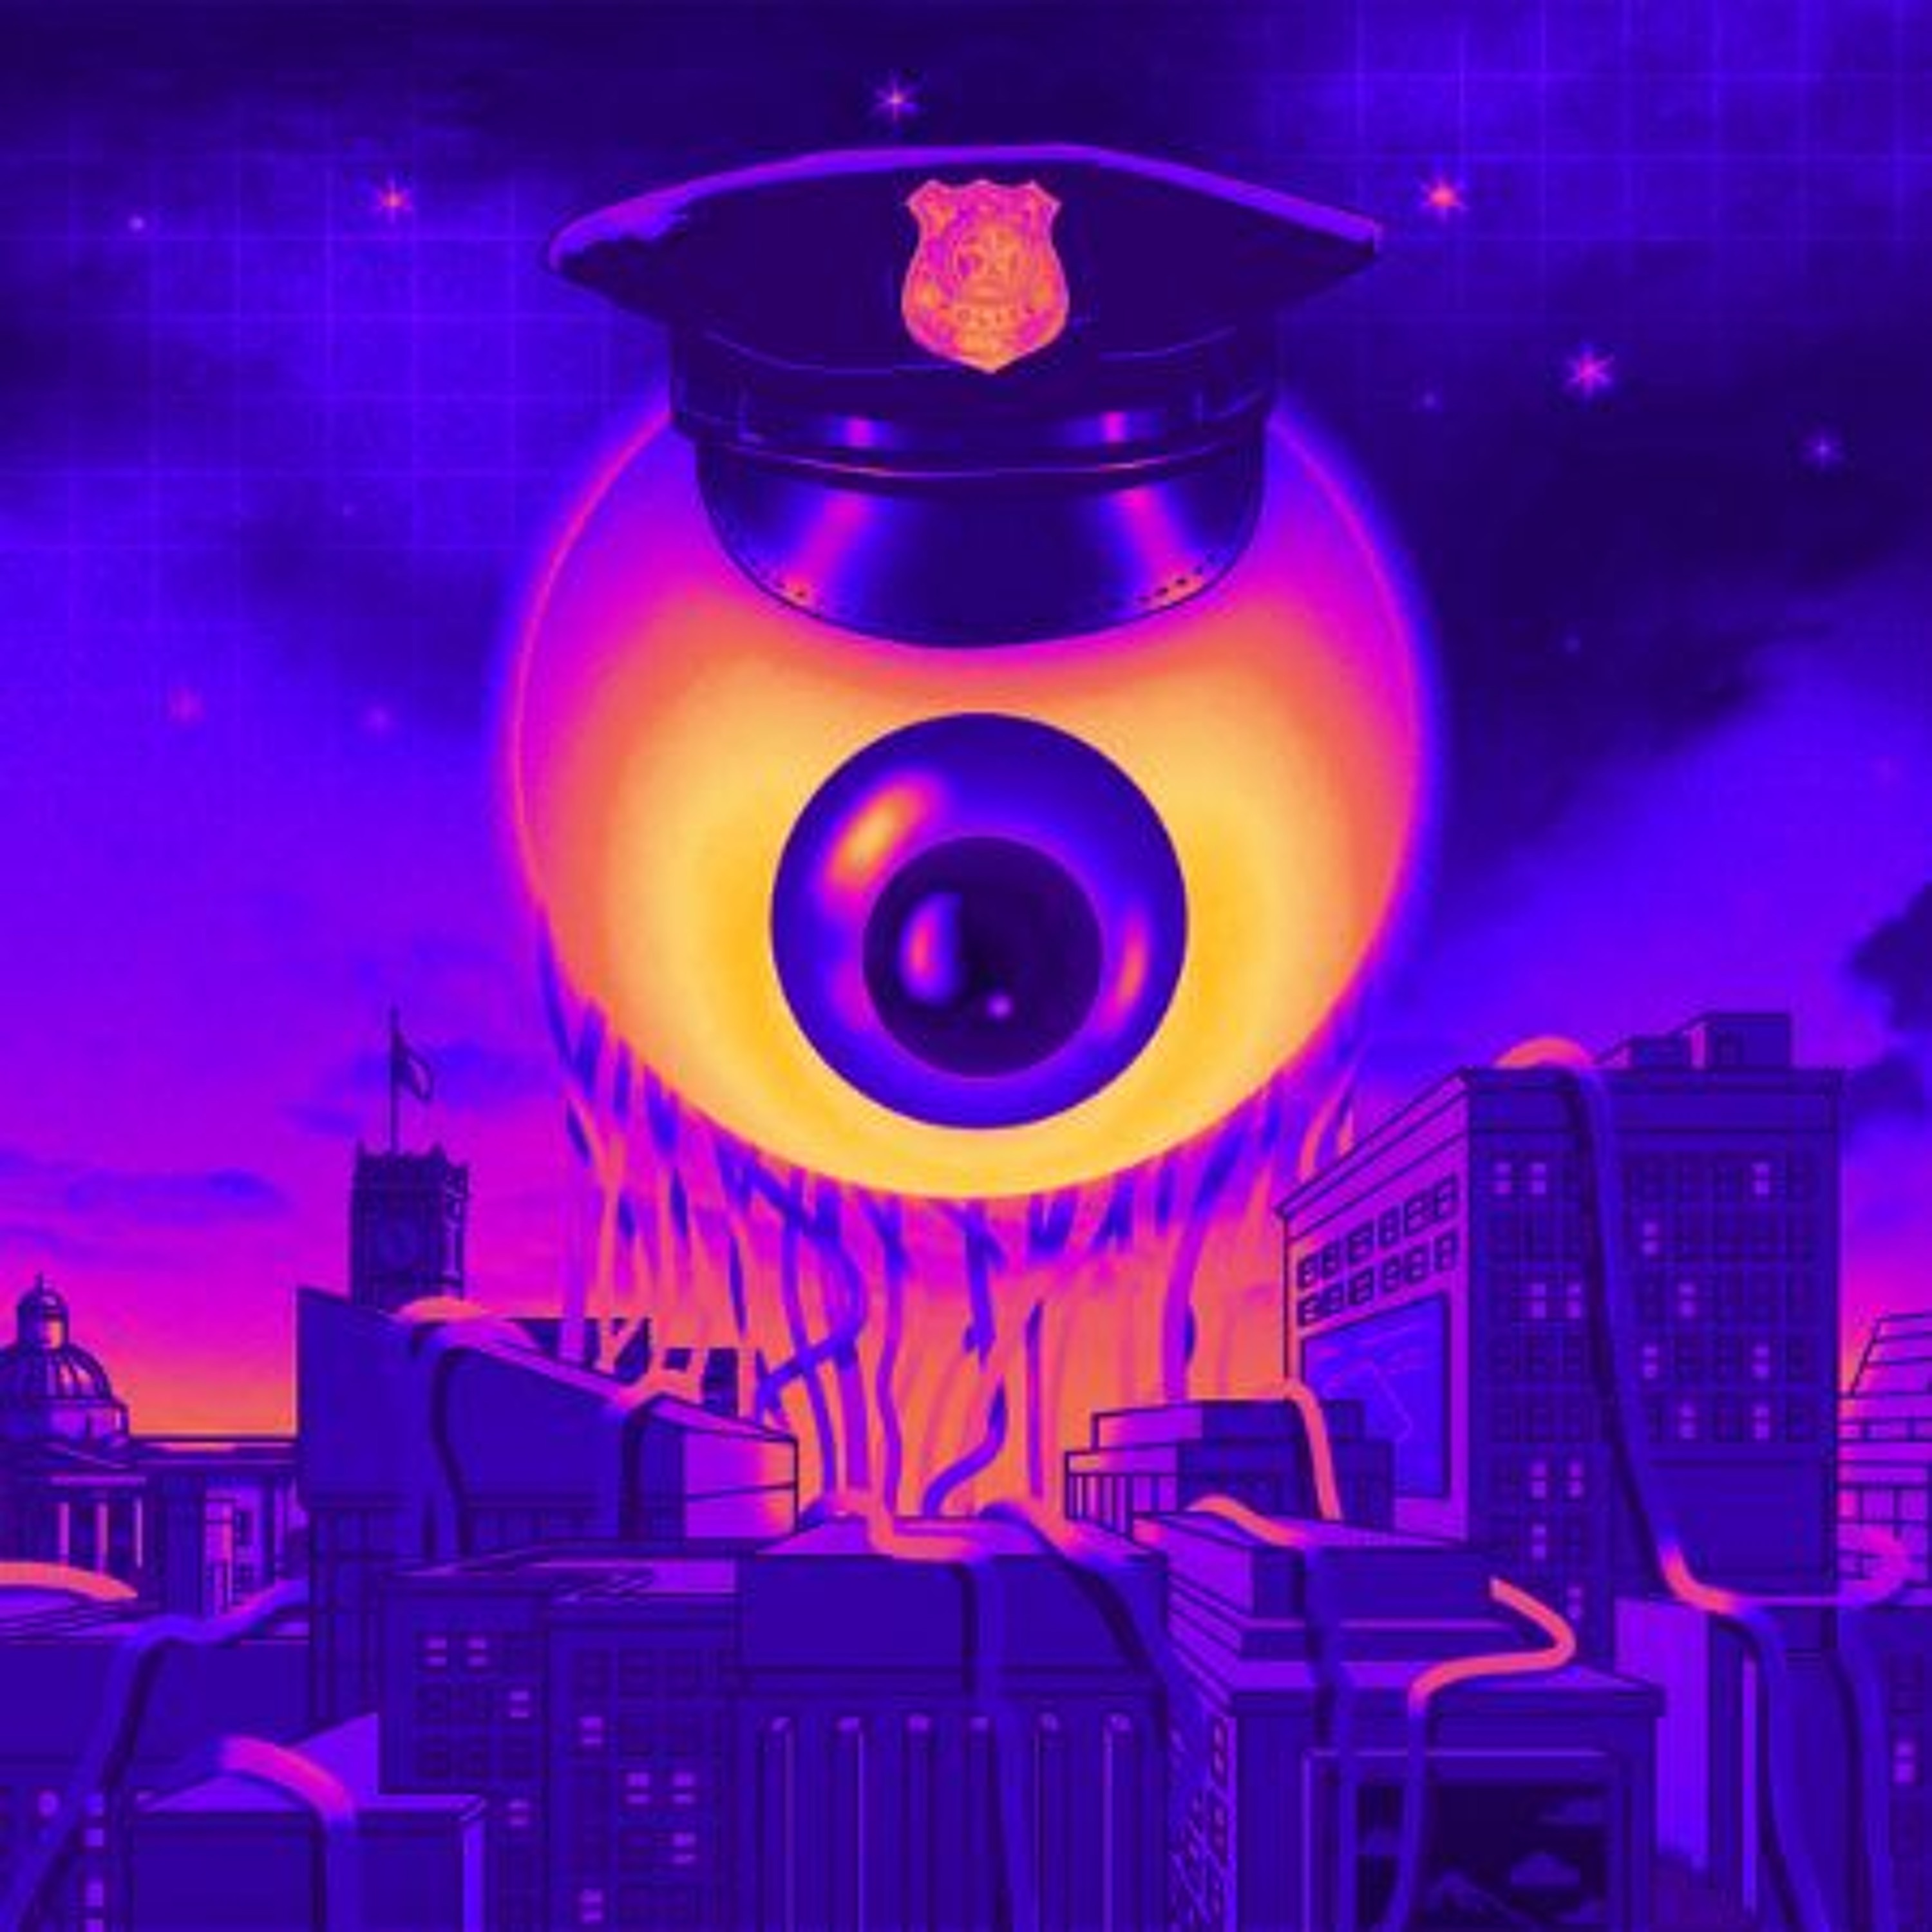 360 Degree Surveillance: How Police Use Public-Private Partnerships to Spy on Americans